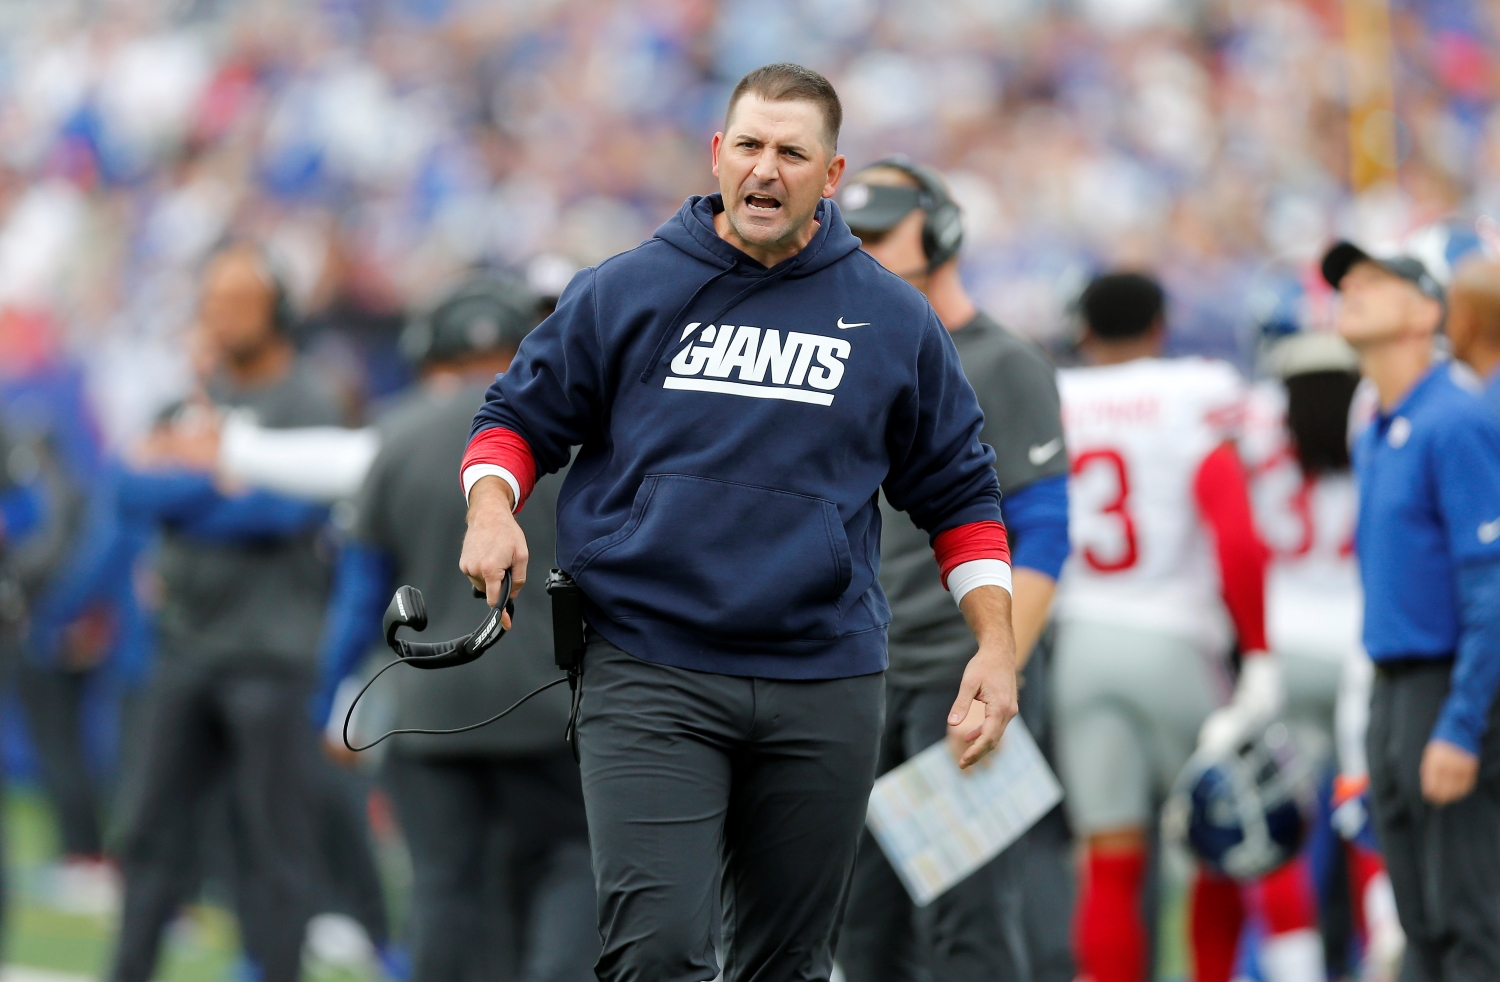 New York Giants head coach Joe Judge reacts angrily to a play during a game.